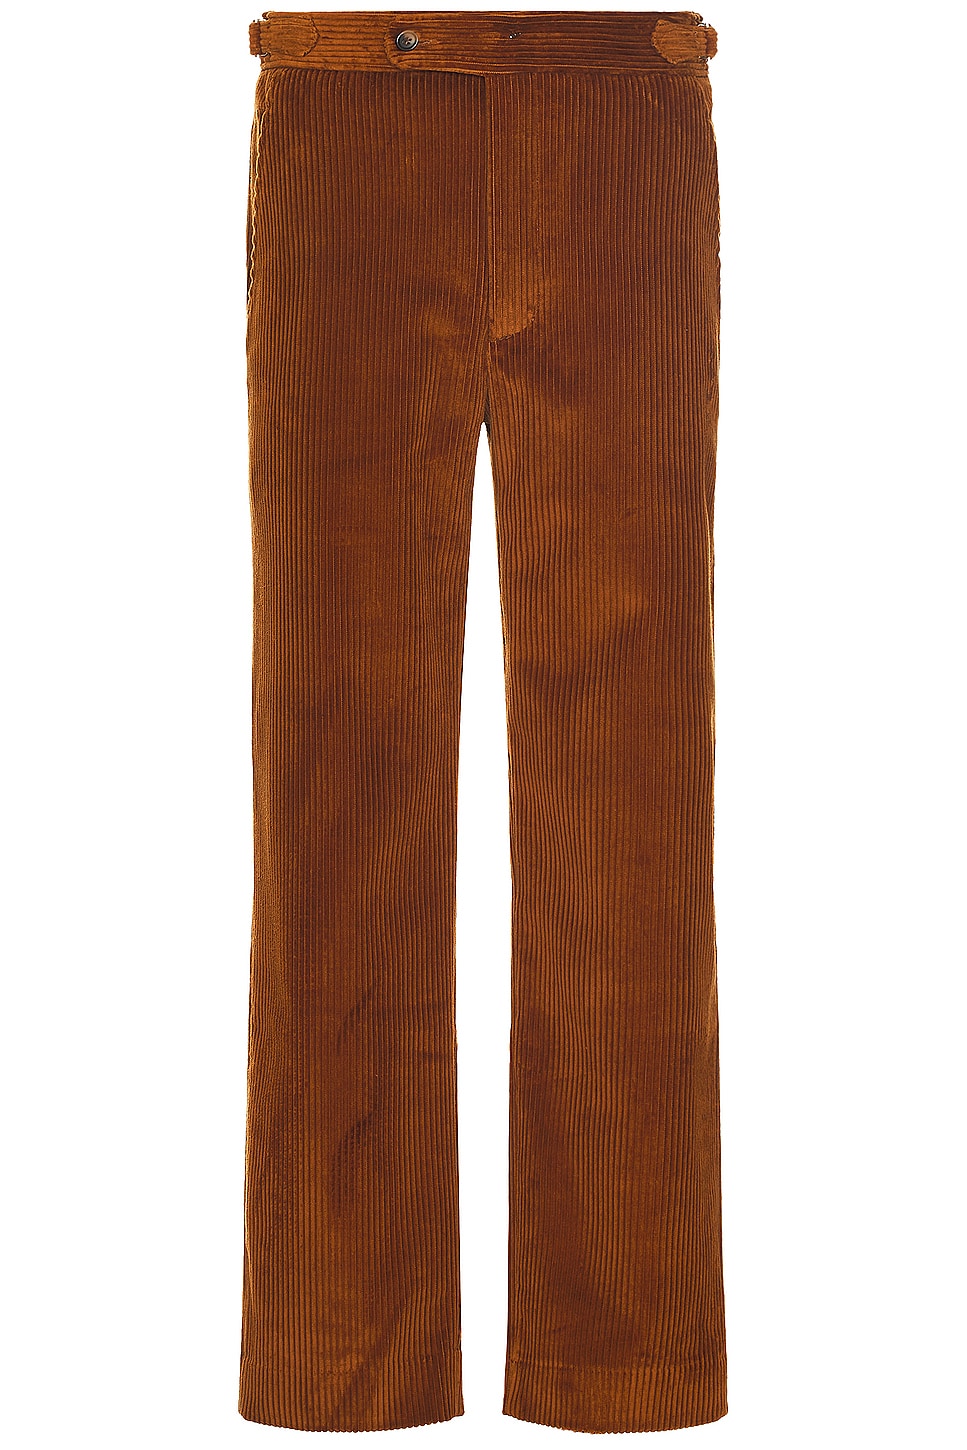 Image 1 of BODE Tobacco Corduroy Trousers in Tobacco